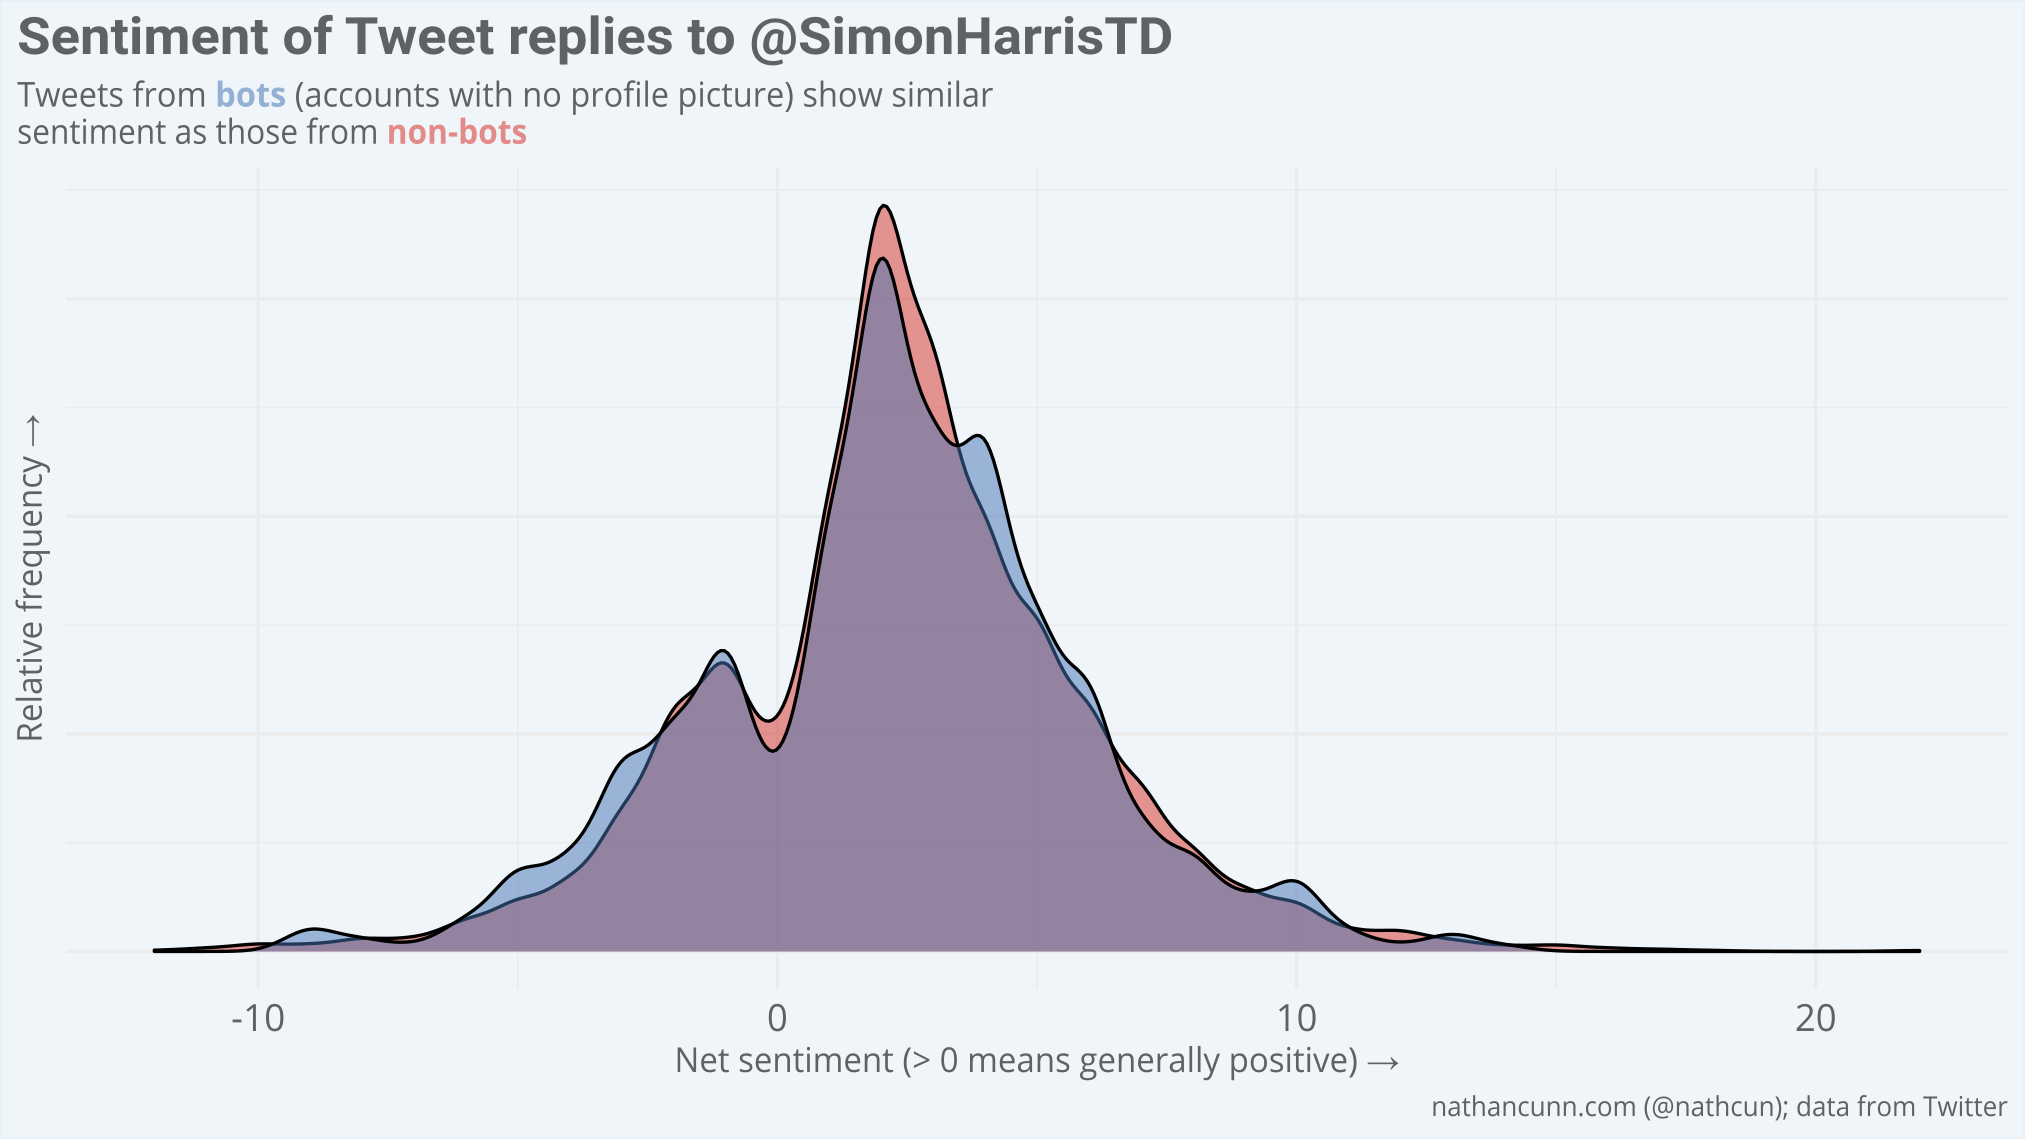 A density plot of the sentiment score of tweet replies to @SimonHarrisTD broken down by supposed bots and non-bots where bots are identified by having no profile image. No difference is observed between the two groups.